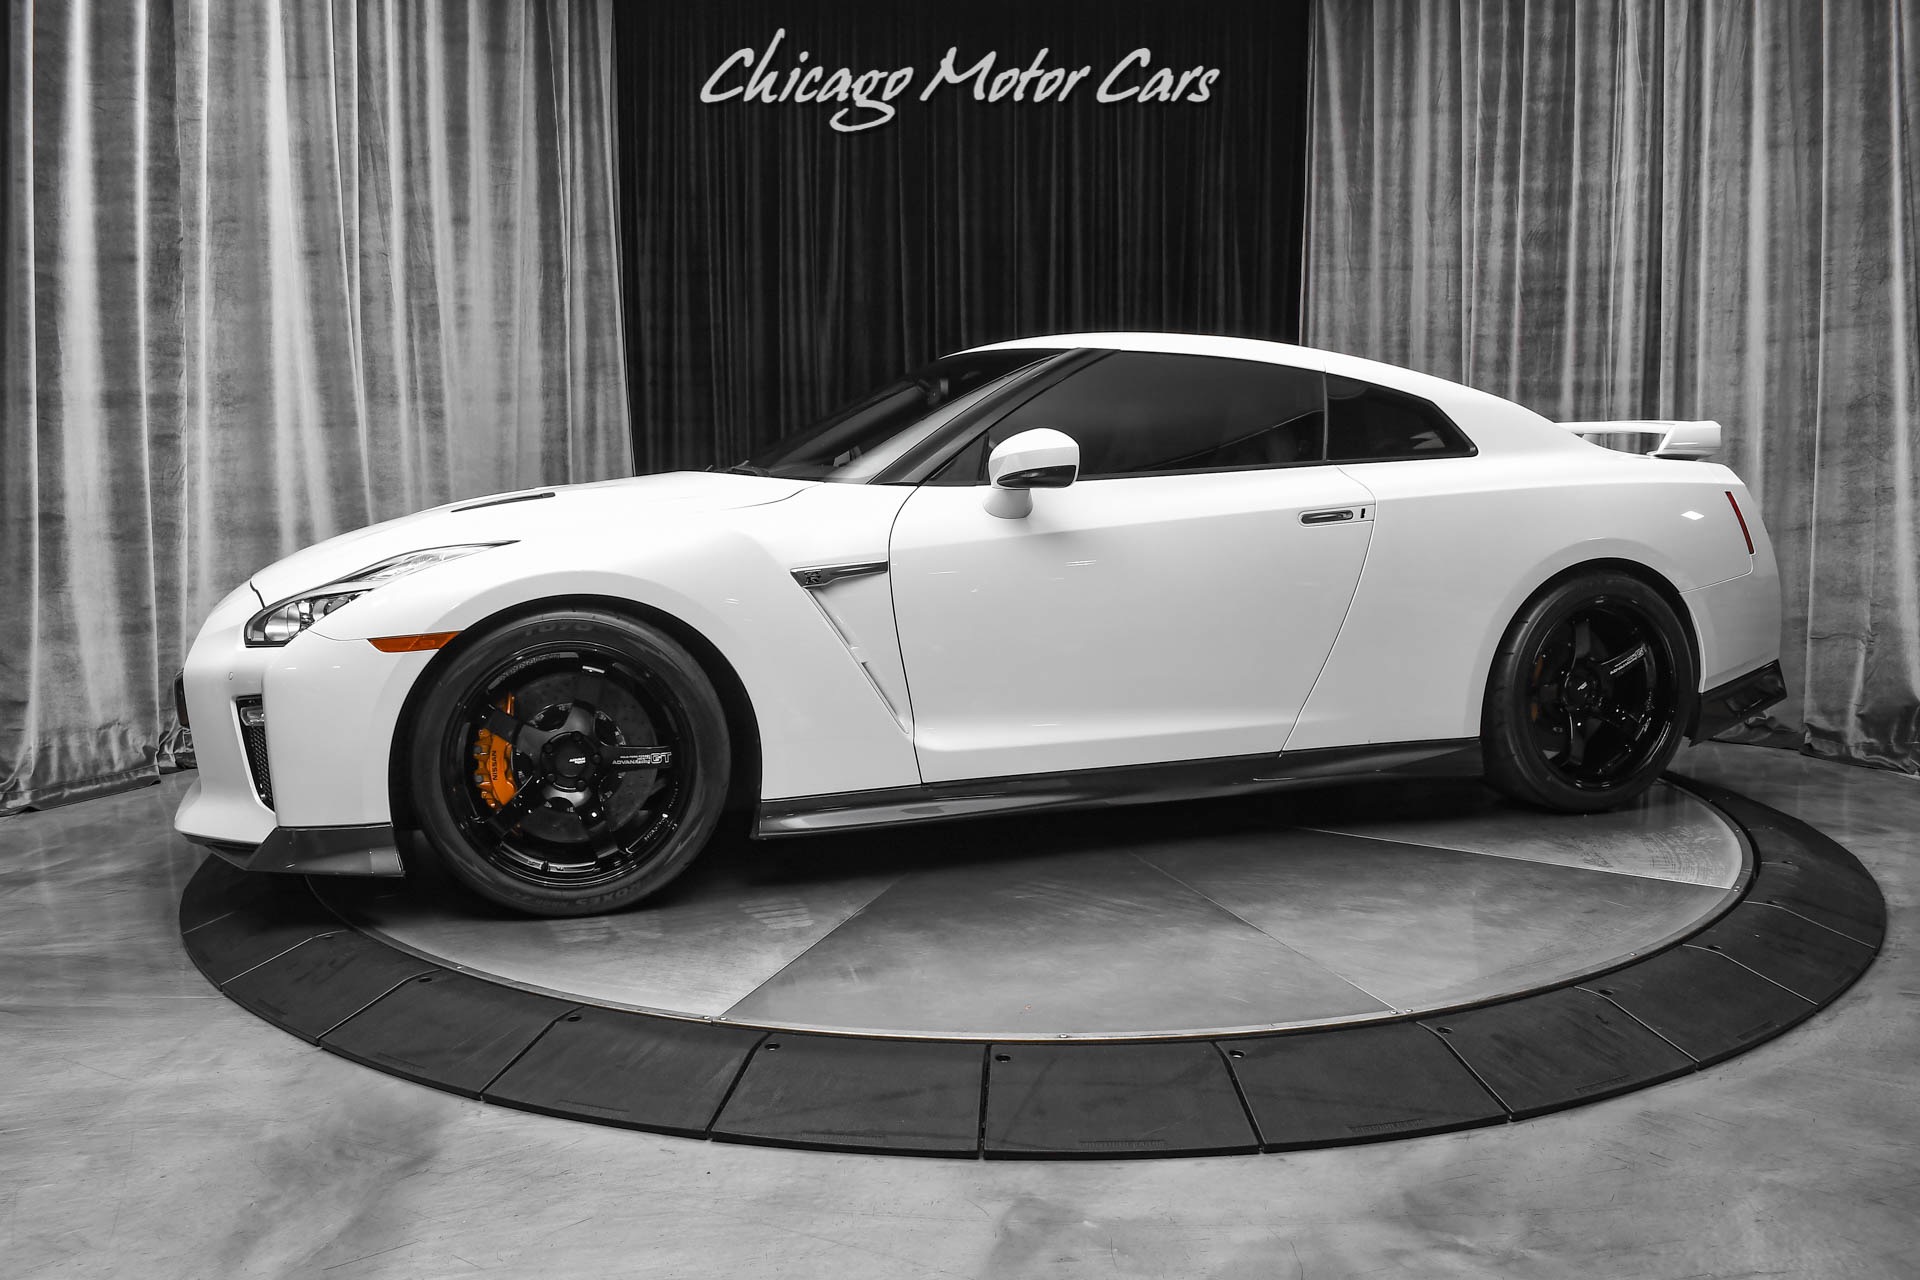 Used-2017-Nissan-GT-R-Premium-Coupe-840WHP-RARE-COLOR-COMBO